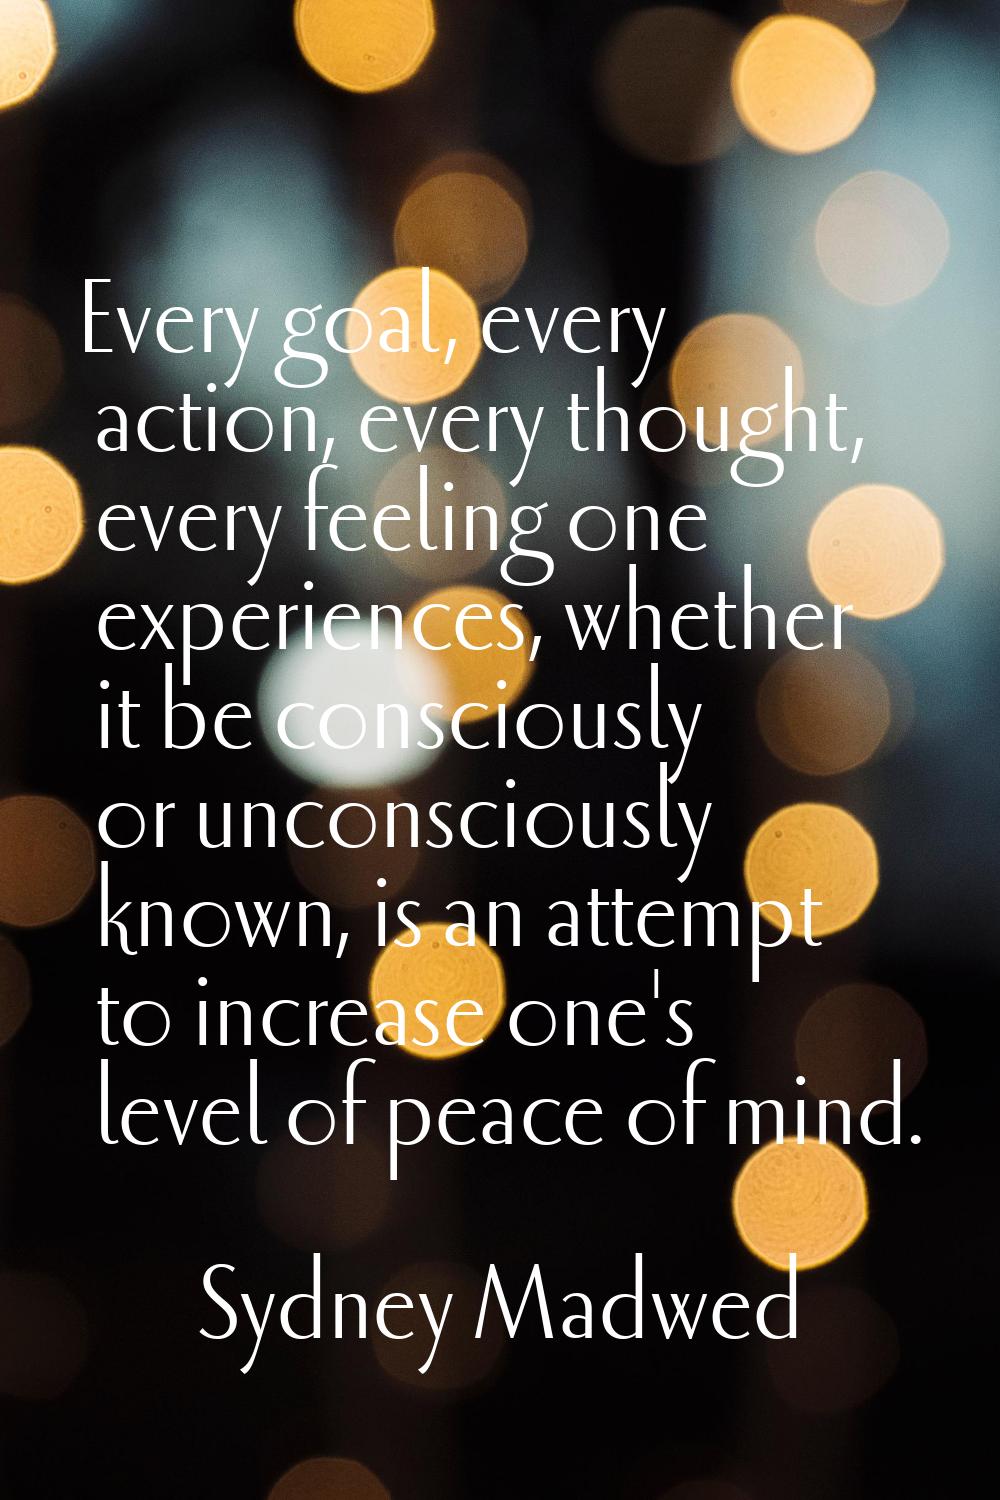 Every goal, every action, every thought, every feeling one experiences, whether it be consciously o